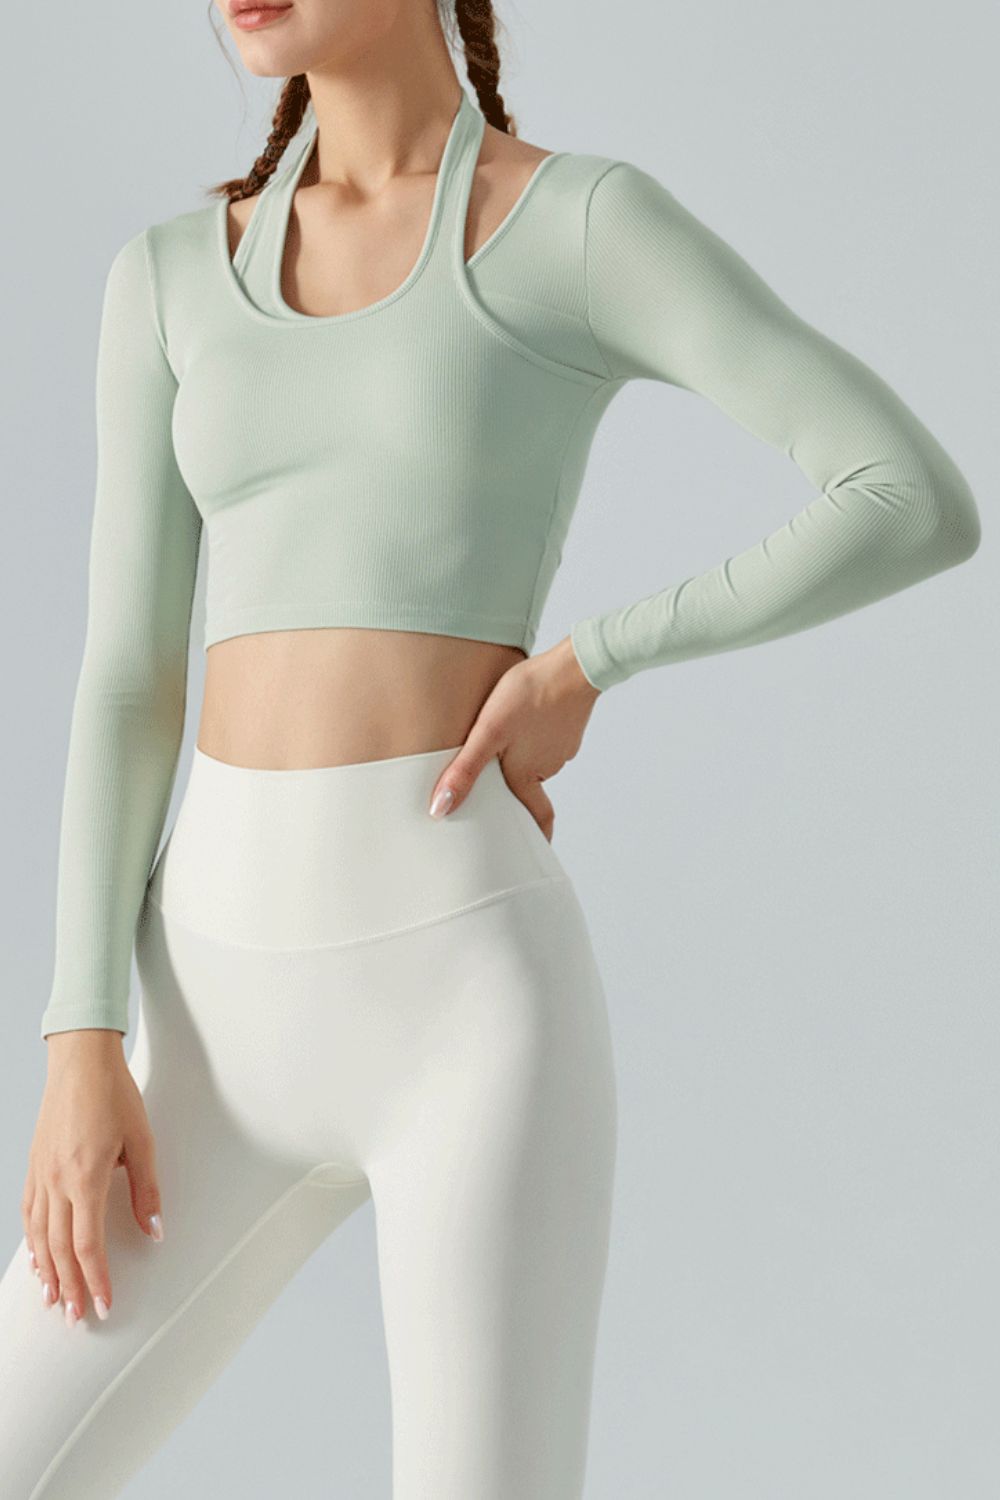 Halter Neck Long Sleeve Cropped Sports Top - Mint / S